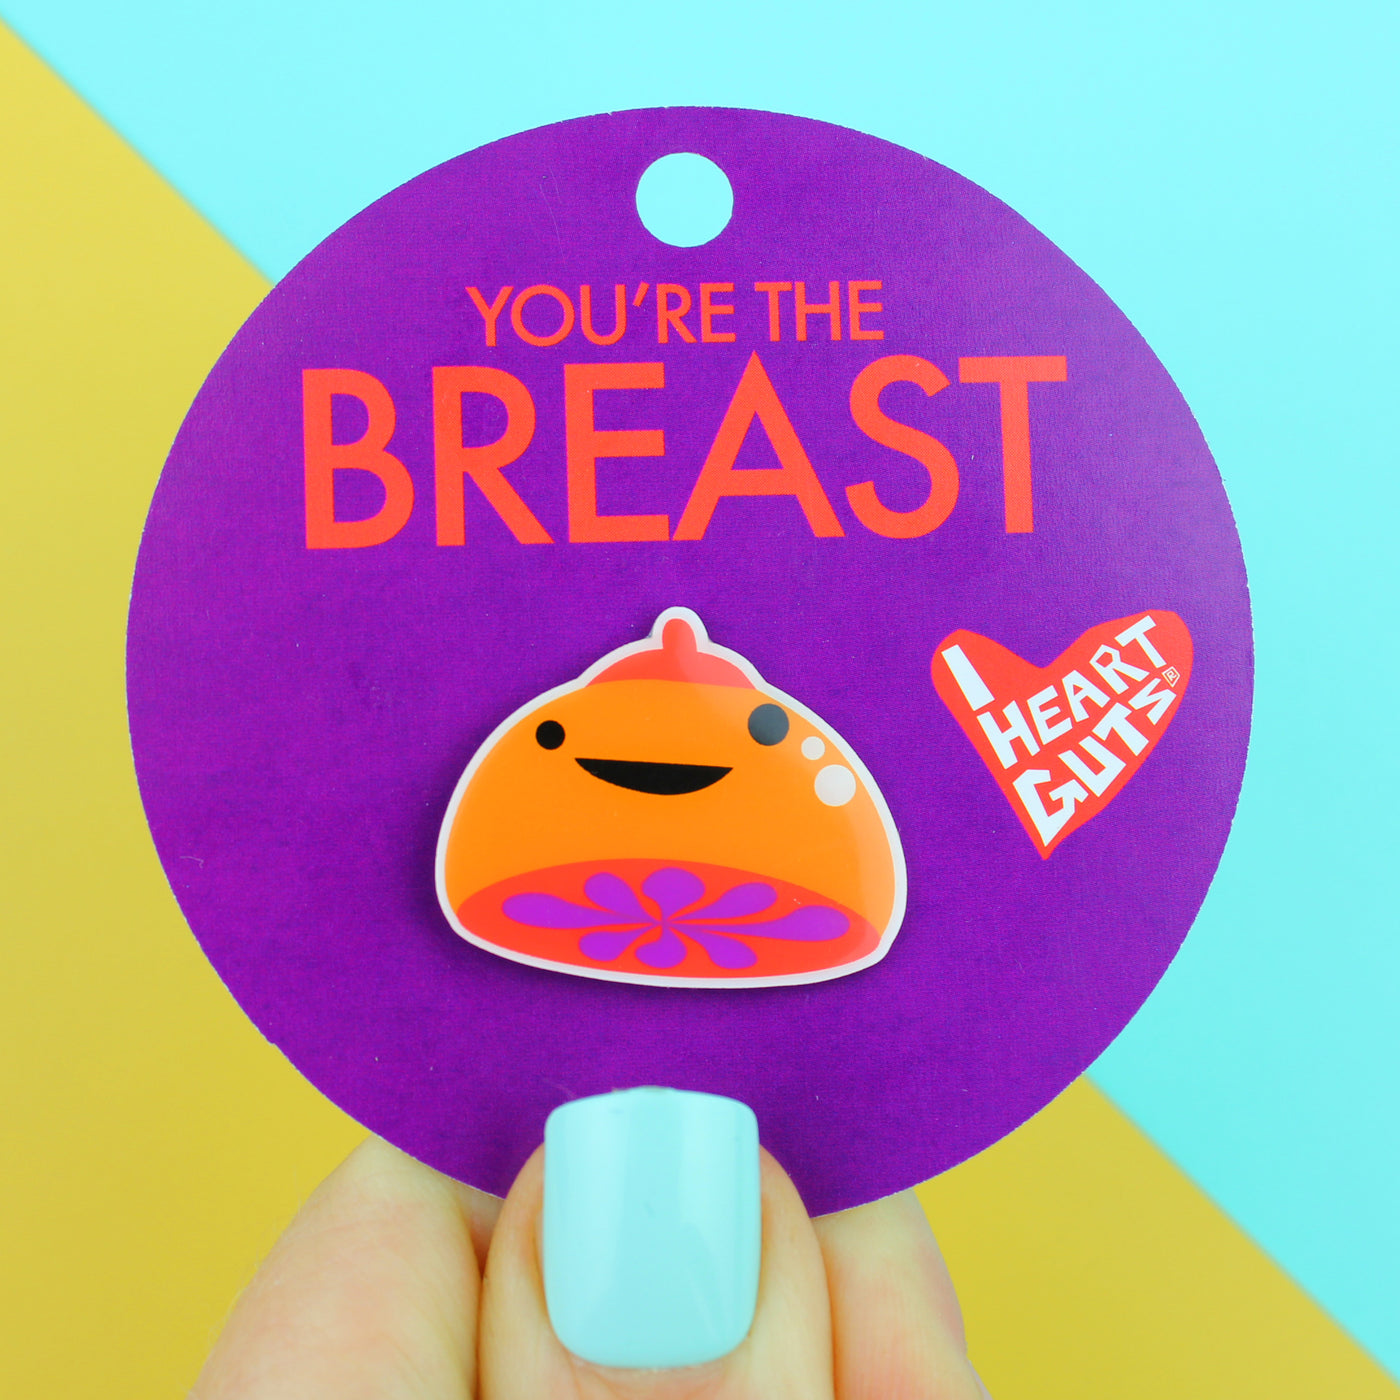 STICKER MY BOOBS: 100 Boobtastic Stickers for Adults